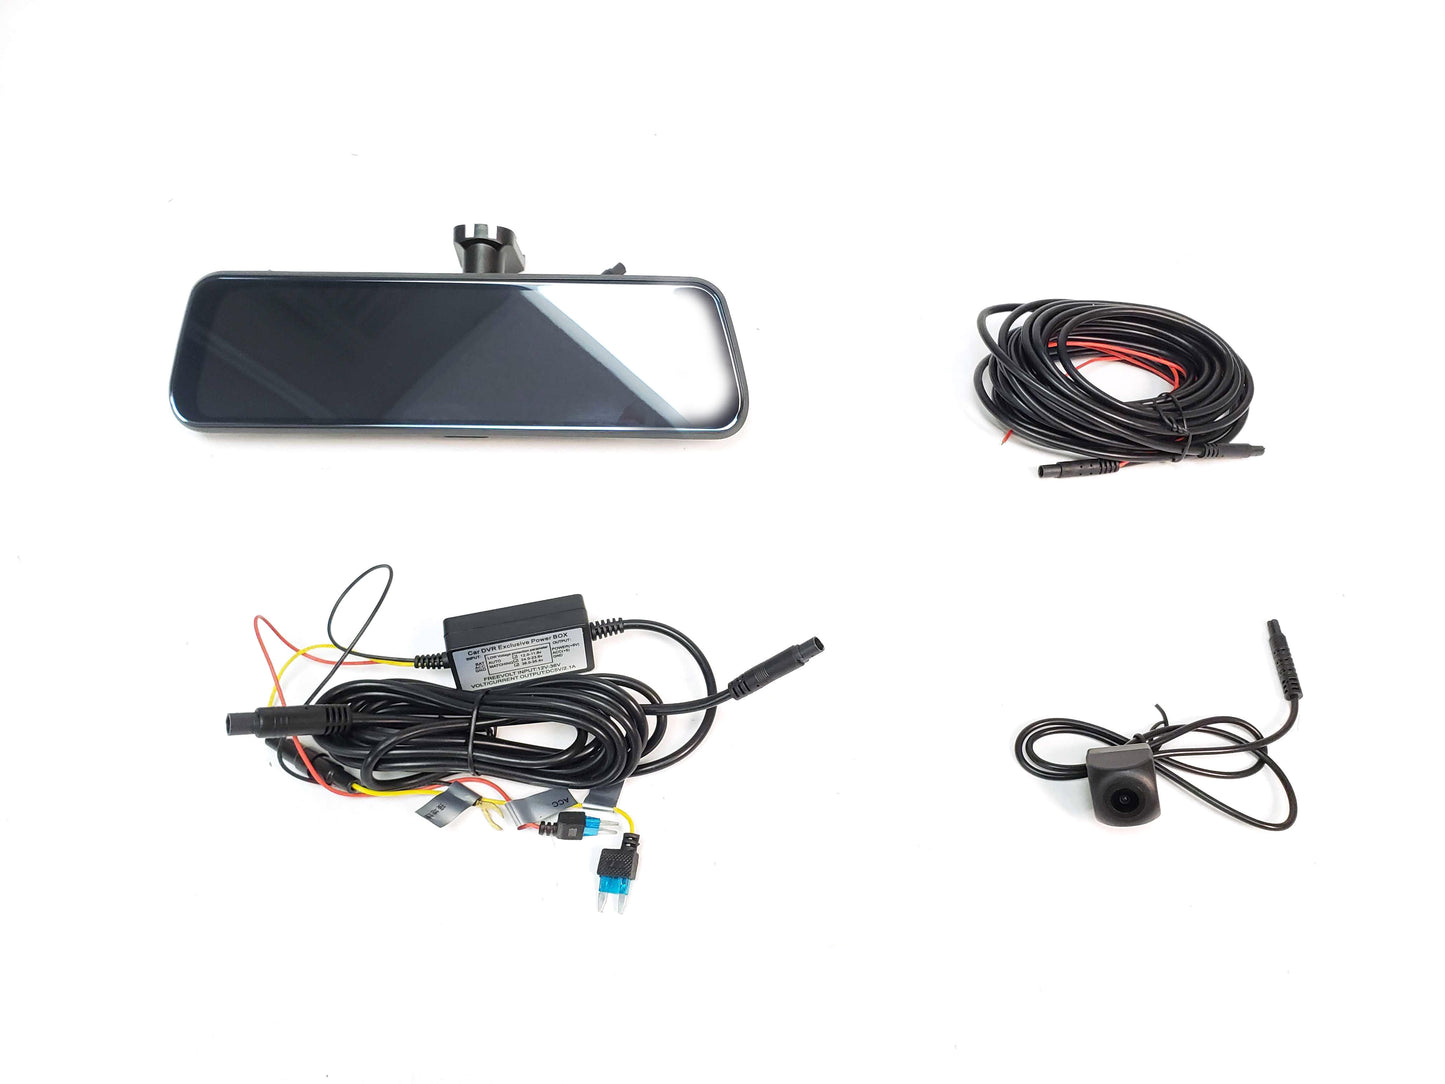 Fullview rearview mirror and camera package contents